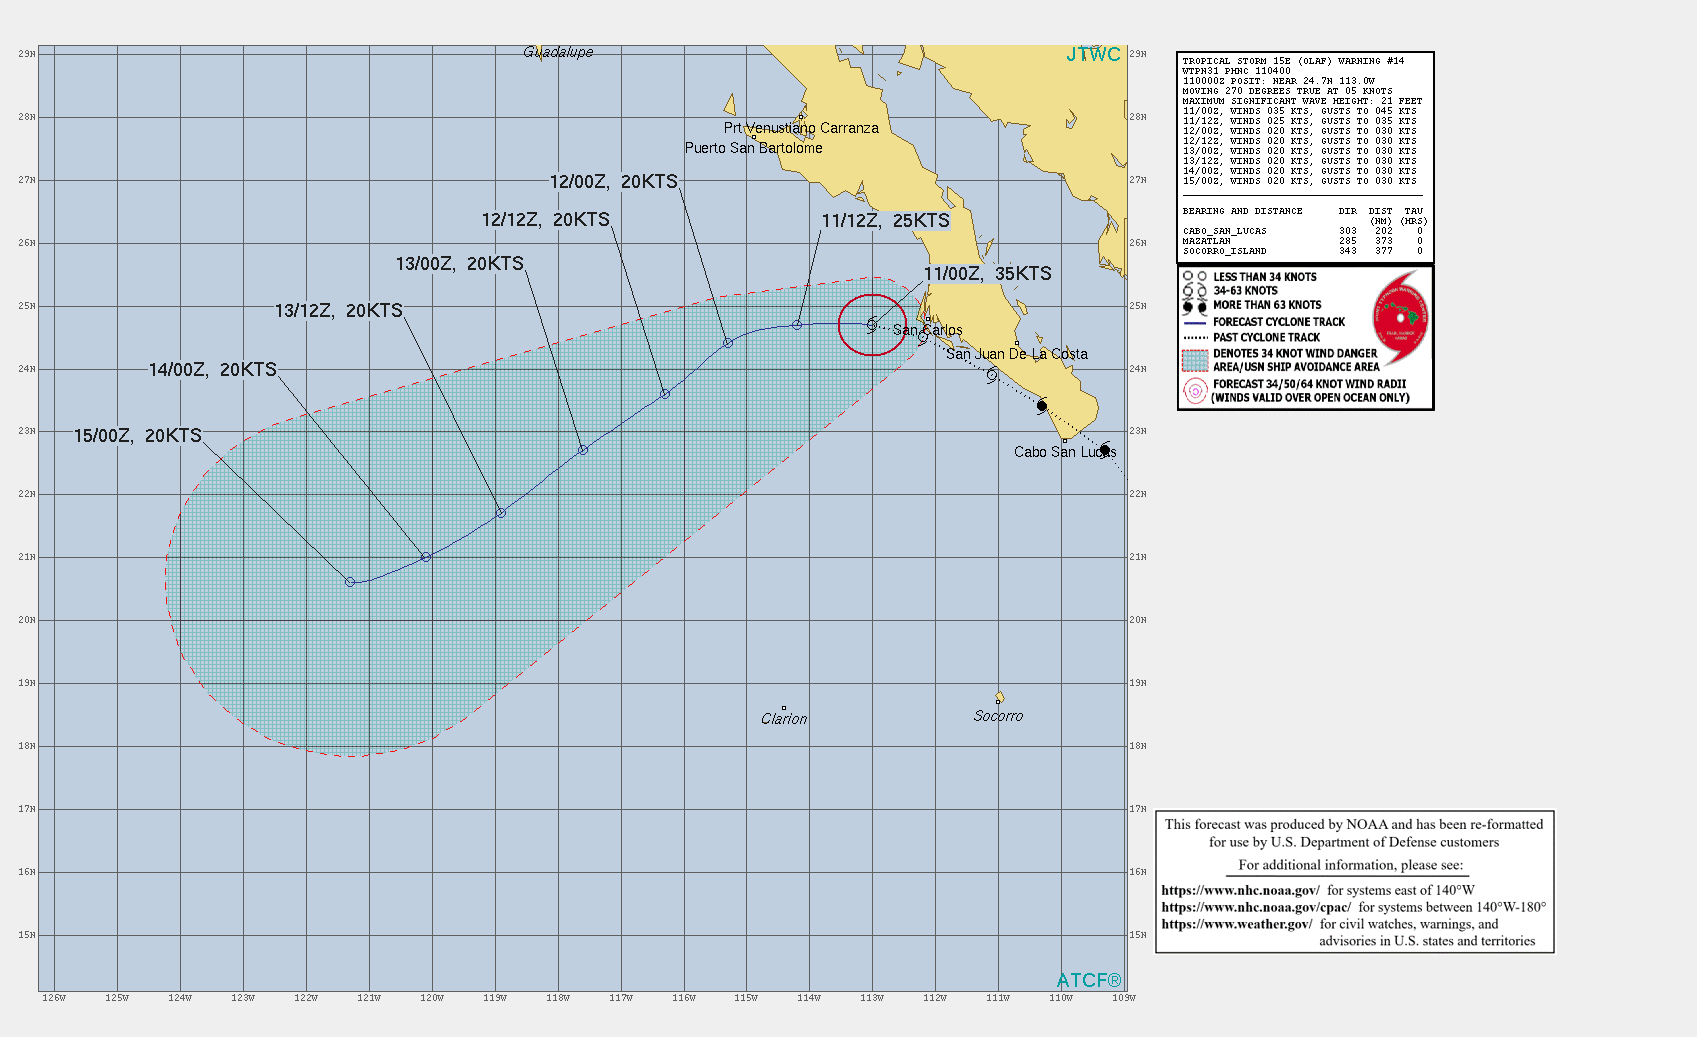 EASTERN PACIFIC. TS 15E(OLAF). WARNING 14 ISSUED AT 11/04UTC.CURRENT INTENSITY IS 35KNOTS  AND IS FORECAST TO FALL BELOW 25KNOTS BY 12/00UTC.